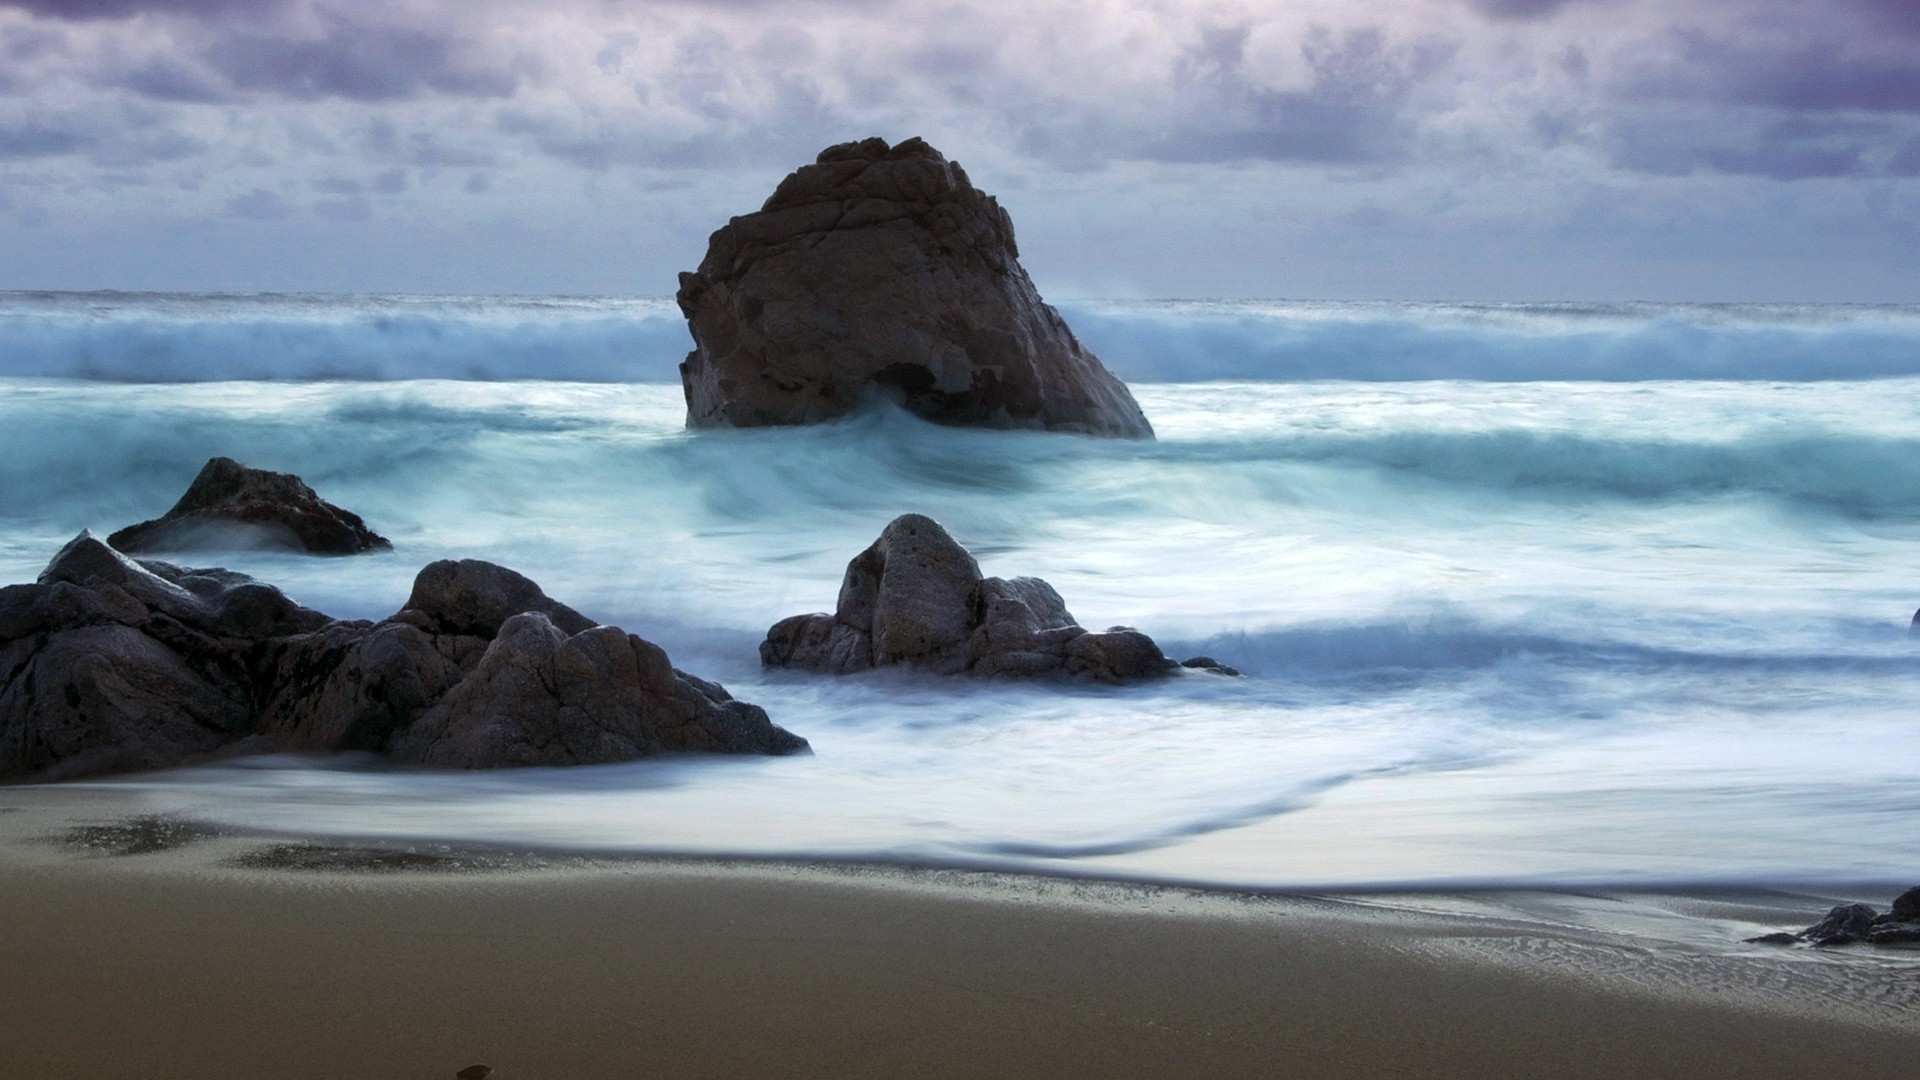 1920x1080 wallpapers: waves, sea, stones, storm, sand, beach (image)